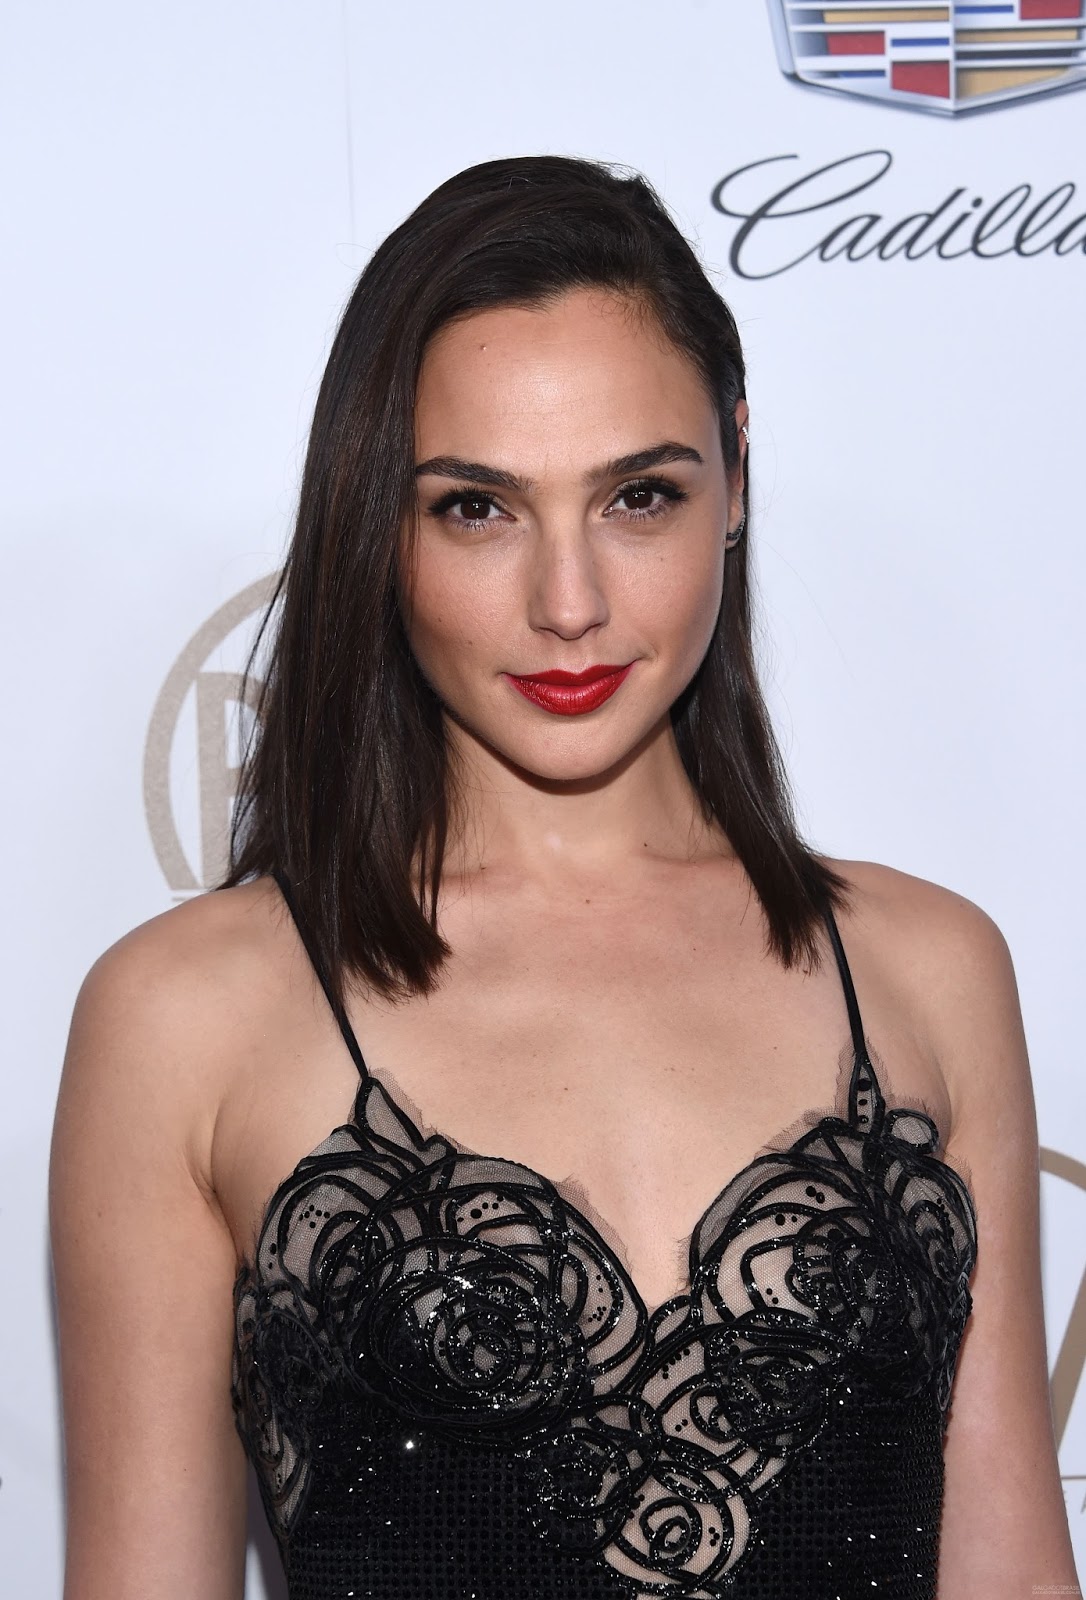 Wonder Woman Source: HQ PHOTOS: Gal Gadot attends the Producers Guild